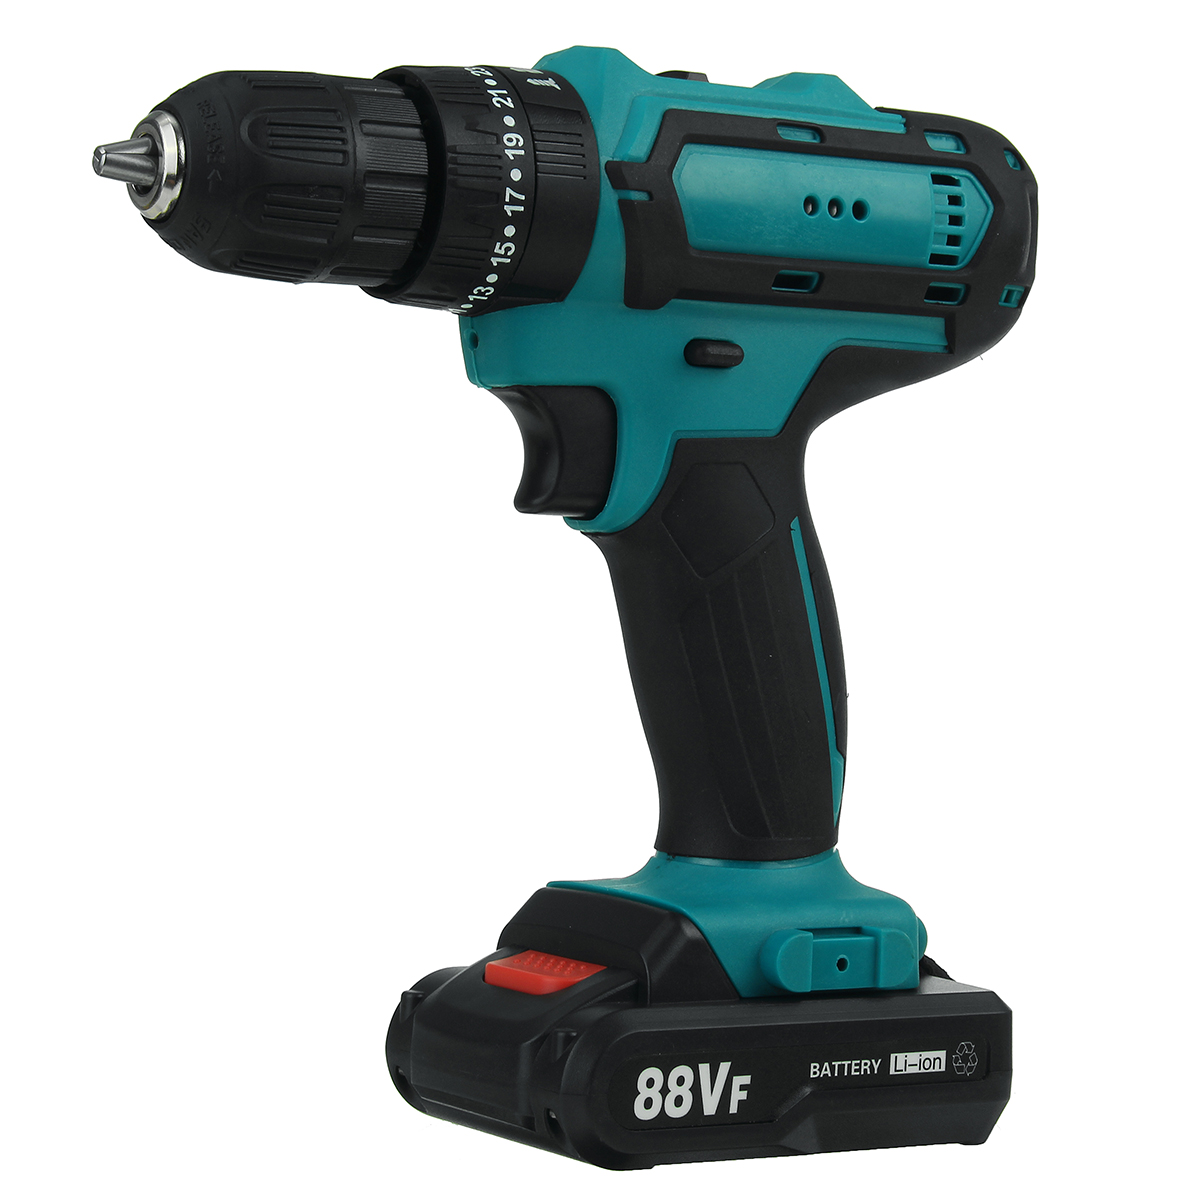 88VF-Cordless-Drill-3-IN-1-Electric-Screwdriver-Hammer-Impact-Drill-7500mAh-2-Speed-1787578-7